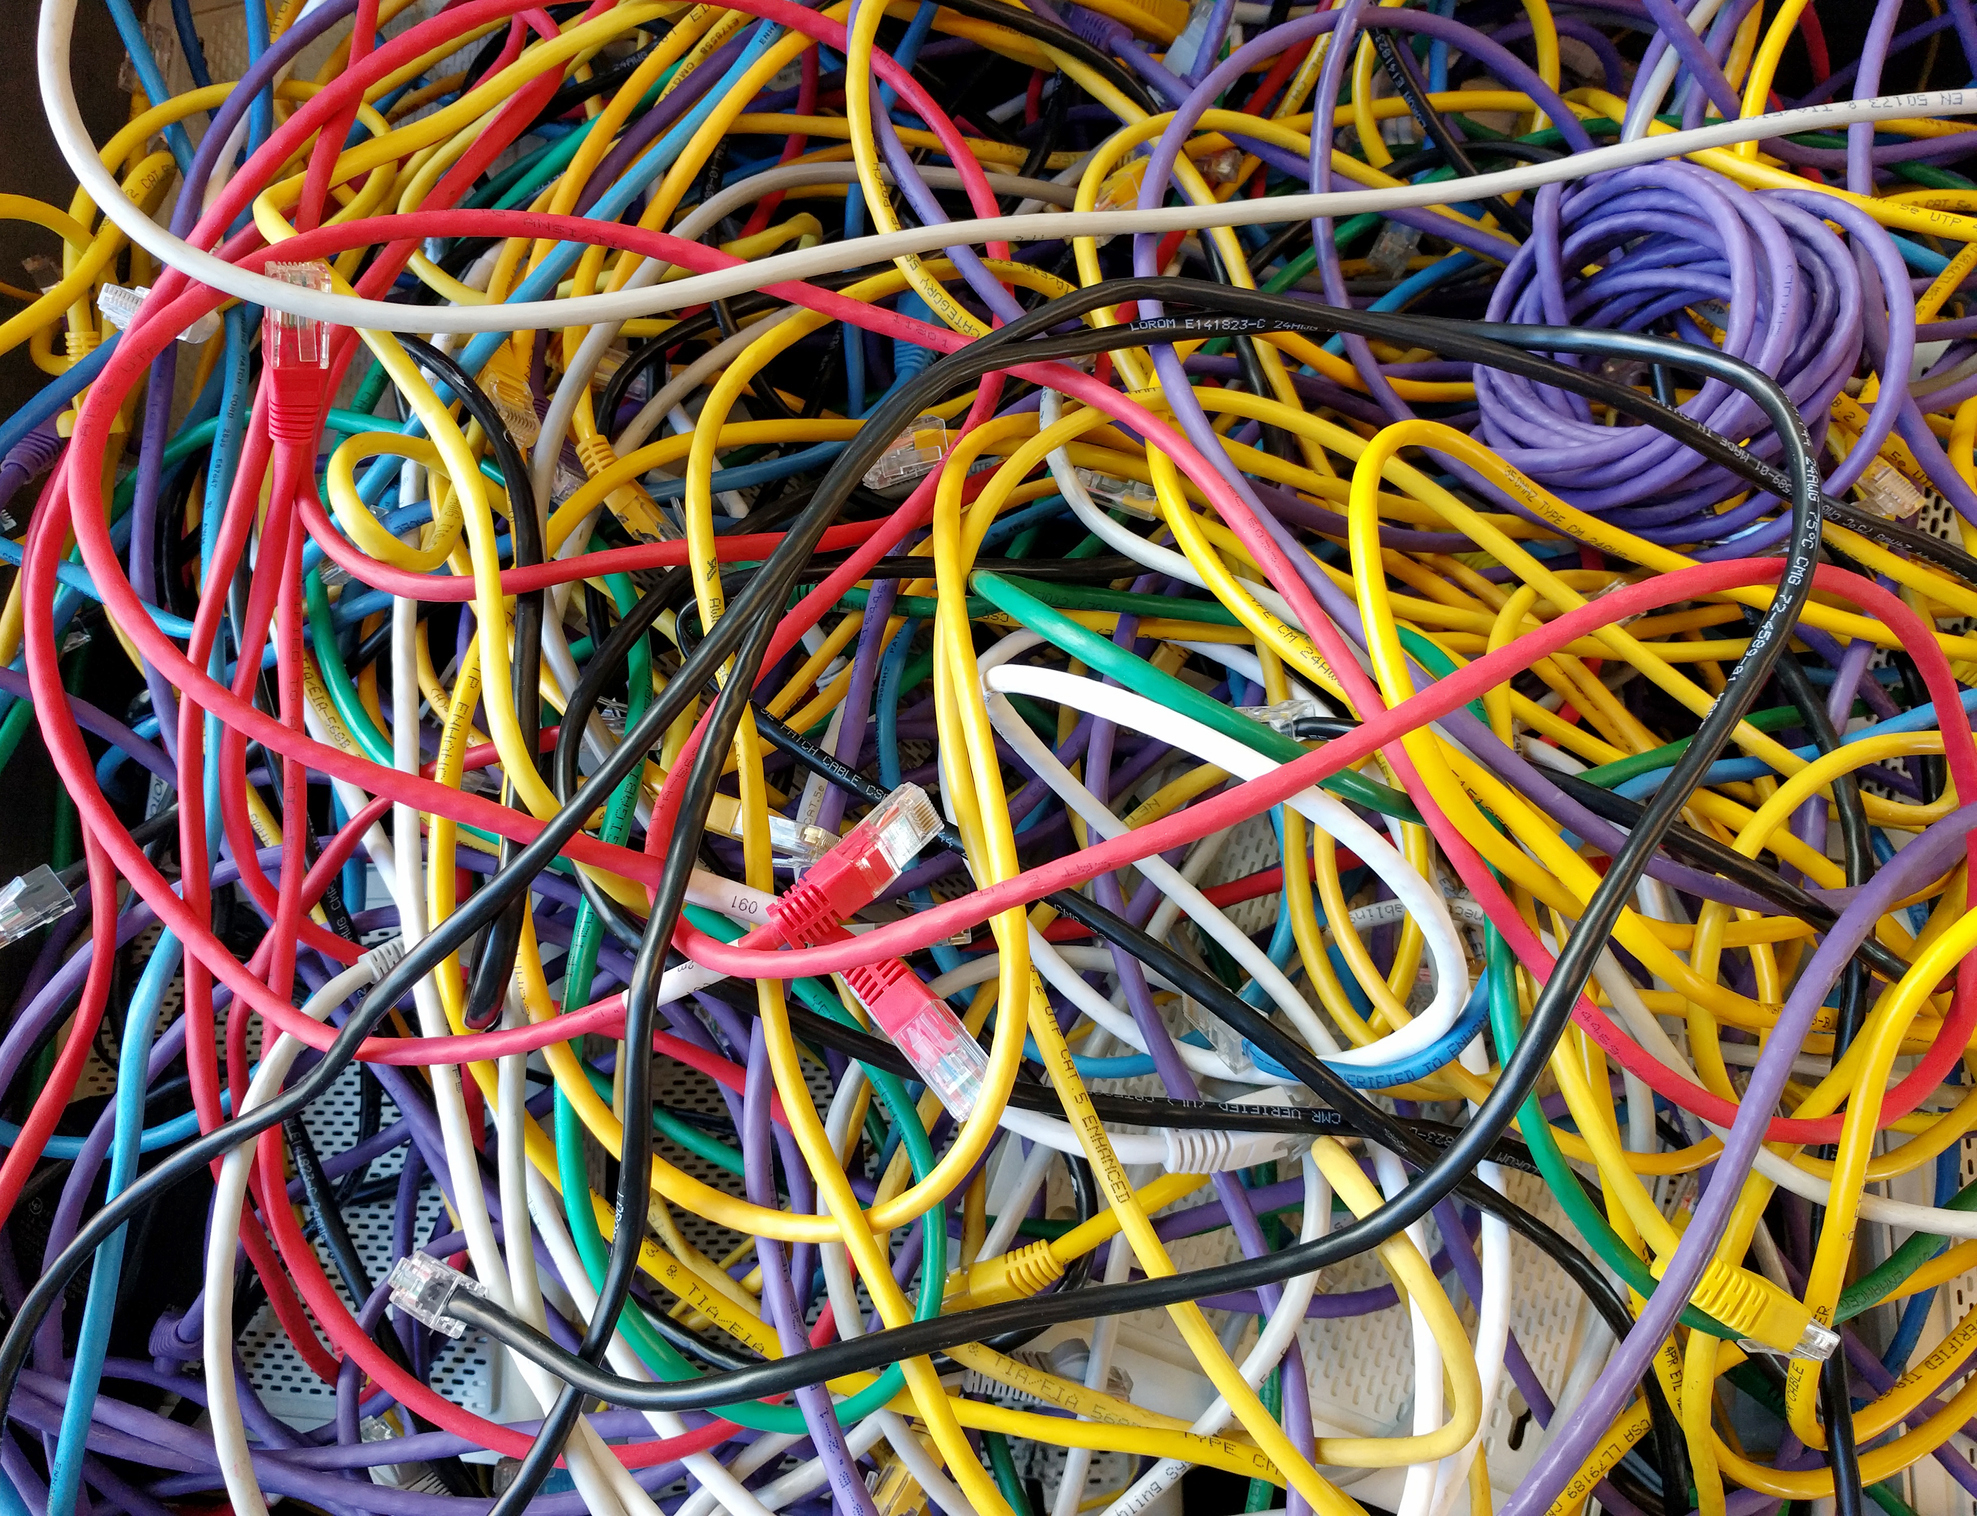 A tangled assortment of various cables